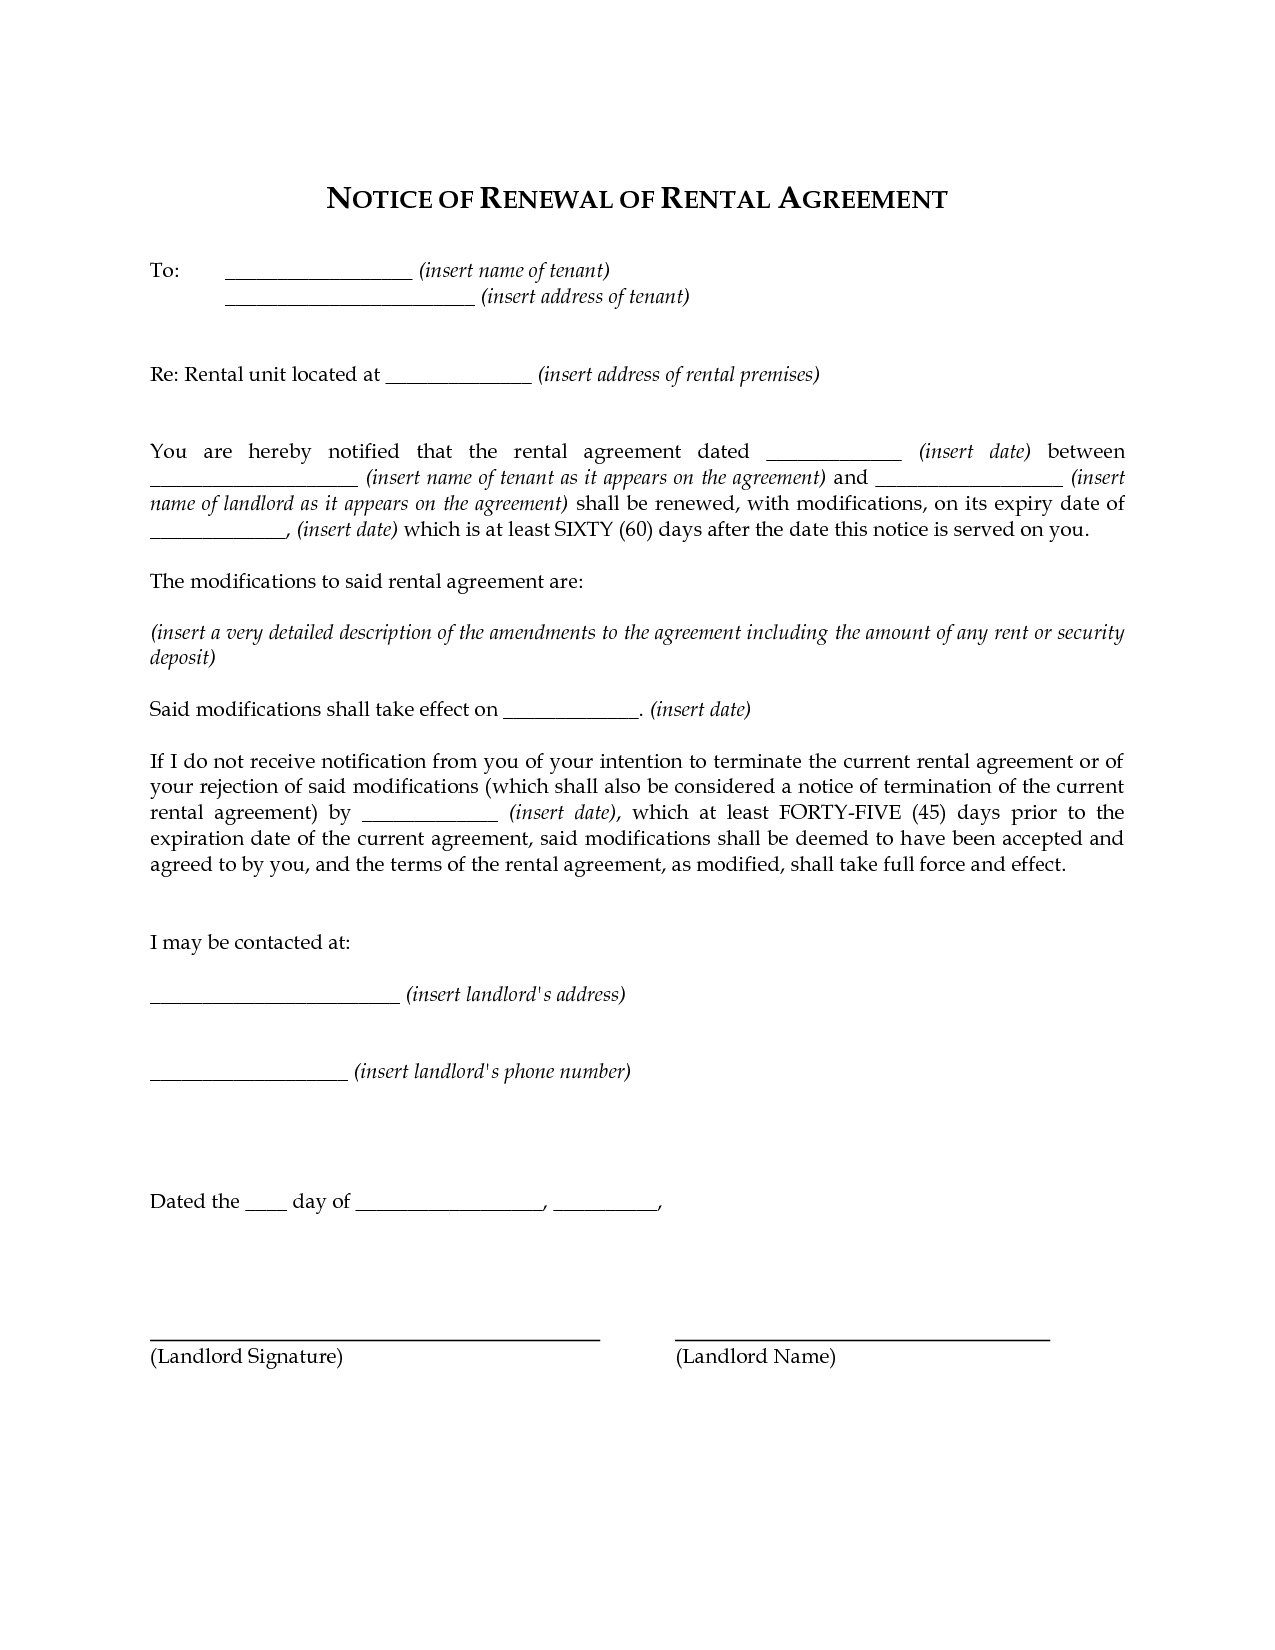 Tenancy Agreement Extension Letter Renewal Of Lease Agreement Letter Original Best S Of Apartment Lease